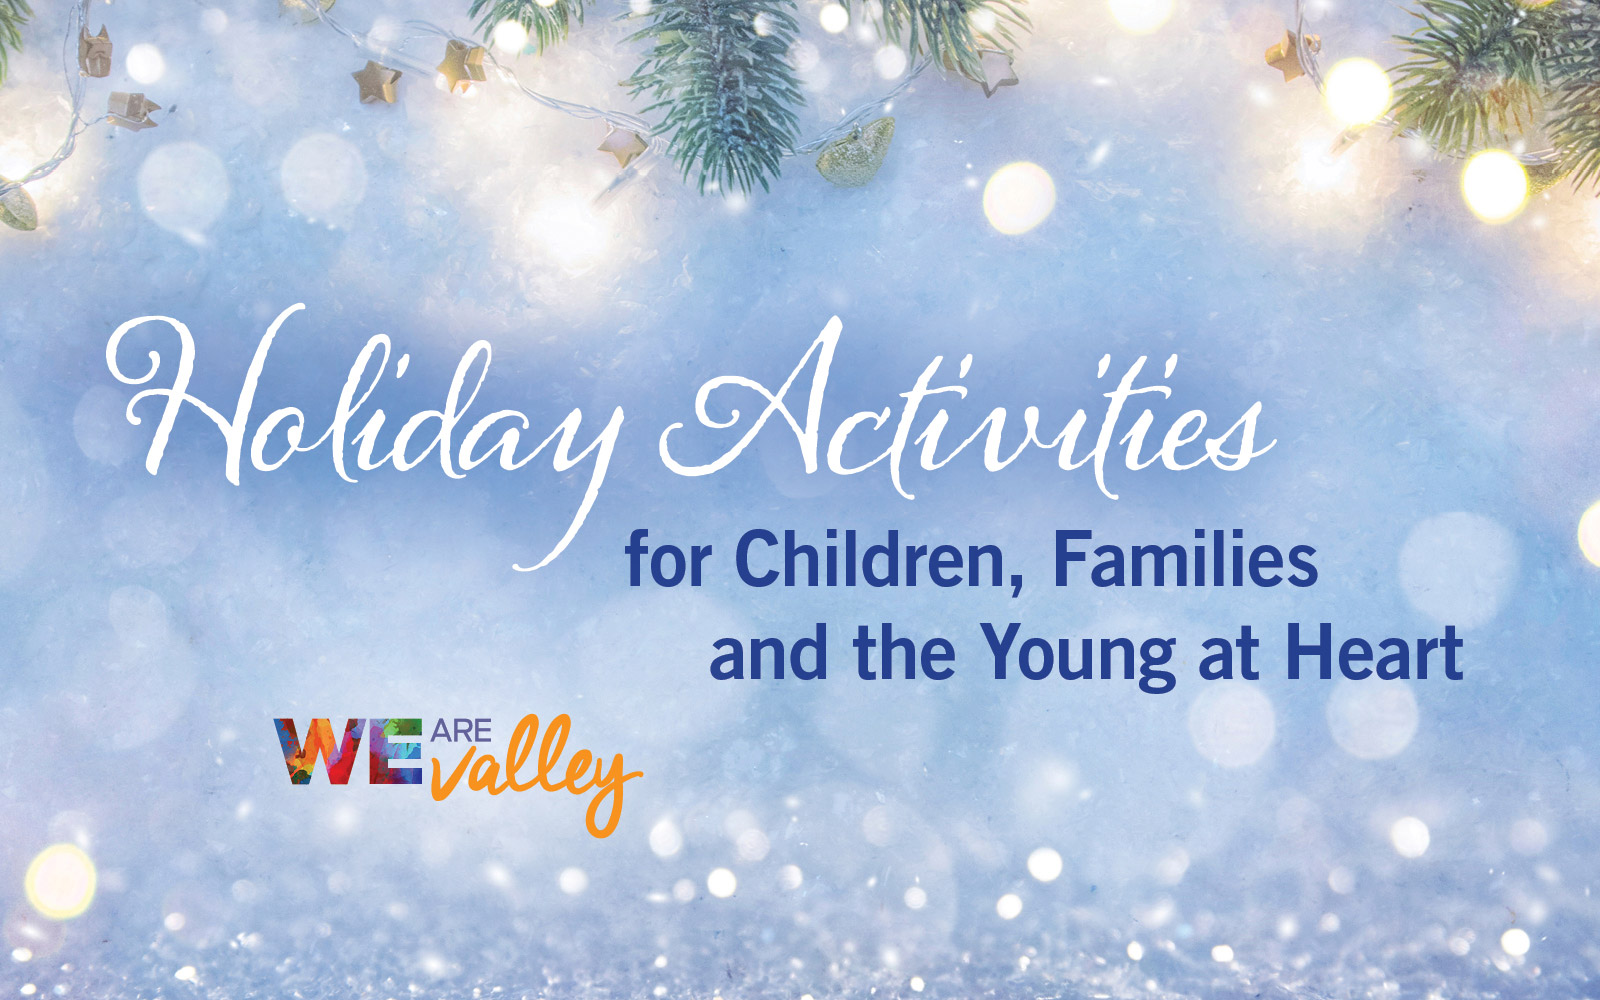 Holiday Happenings and Family Fun for a Safe and Special Season!